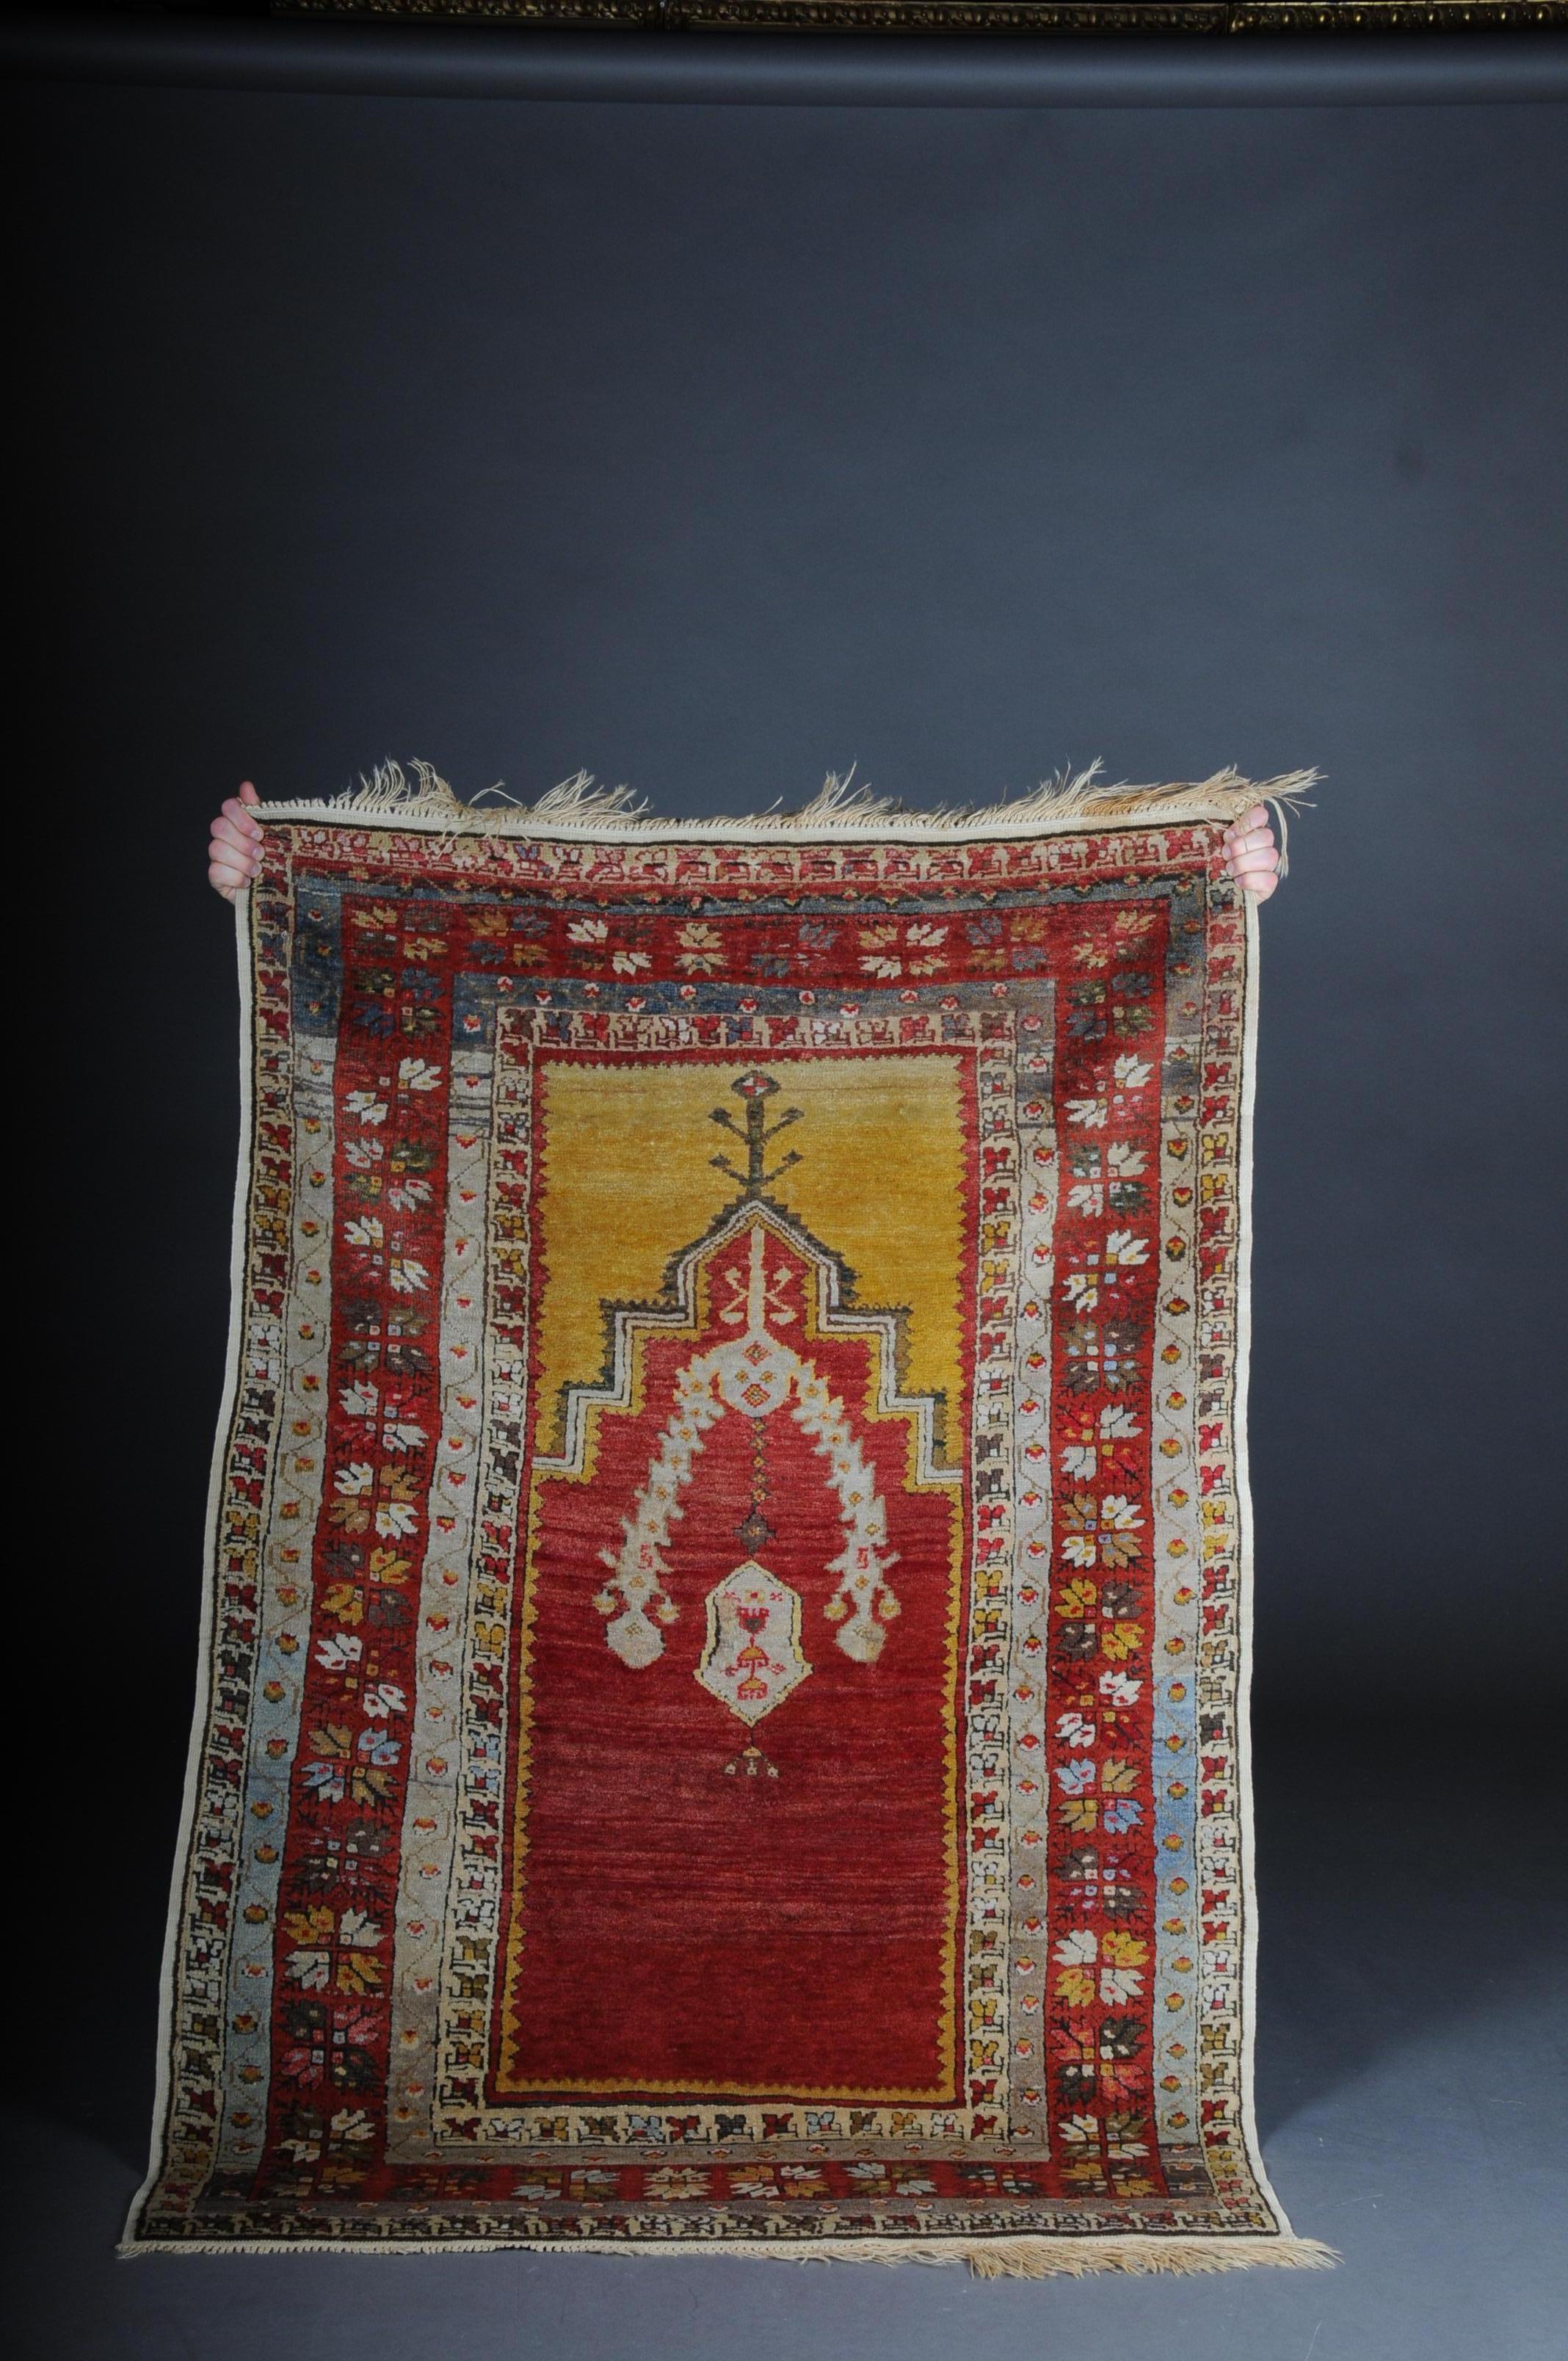 Antique Anatolian Konya prayer bridge / carpet from circa 1920

Anatolian double niche carpet. Red background, stepped mihrab is crowned by a beautiful, rich yellow niche and a panel with arrow-like ornaments.
Very good condition of the wool.